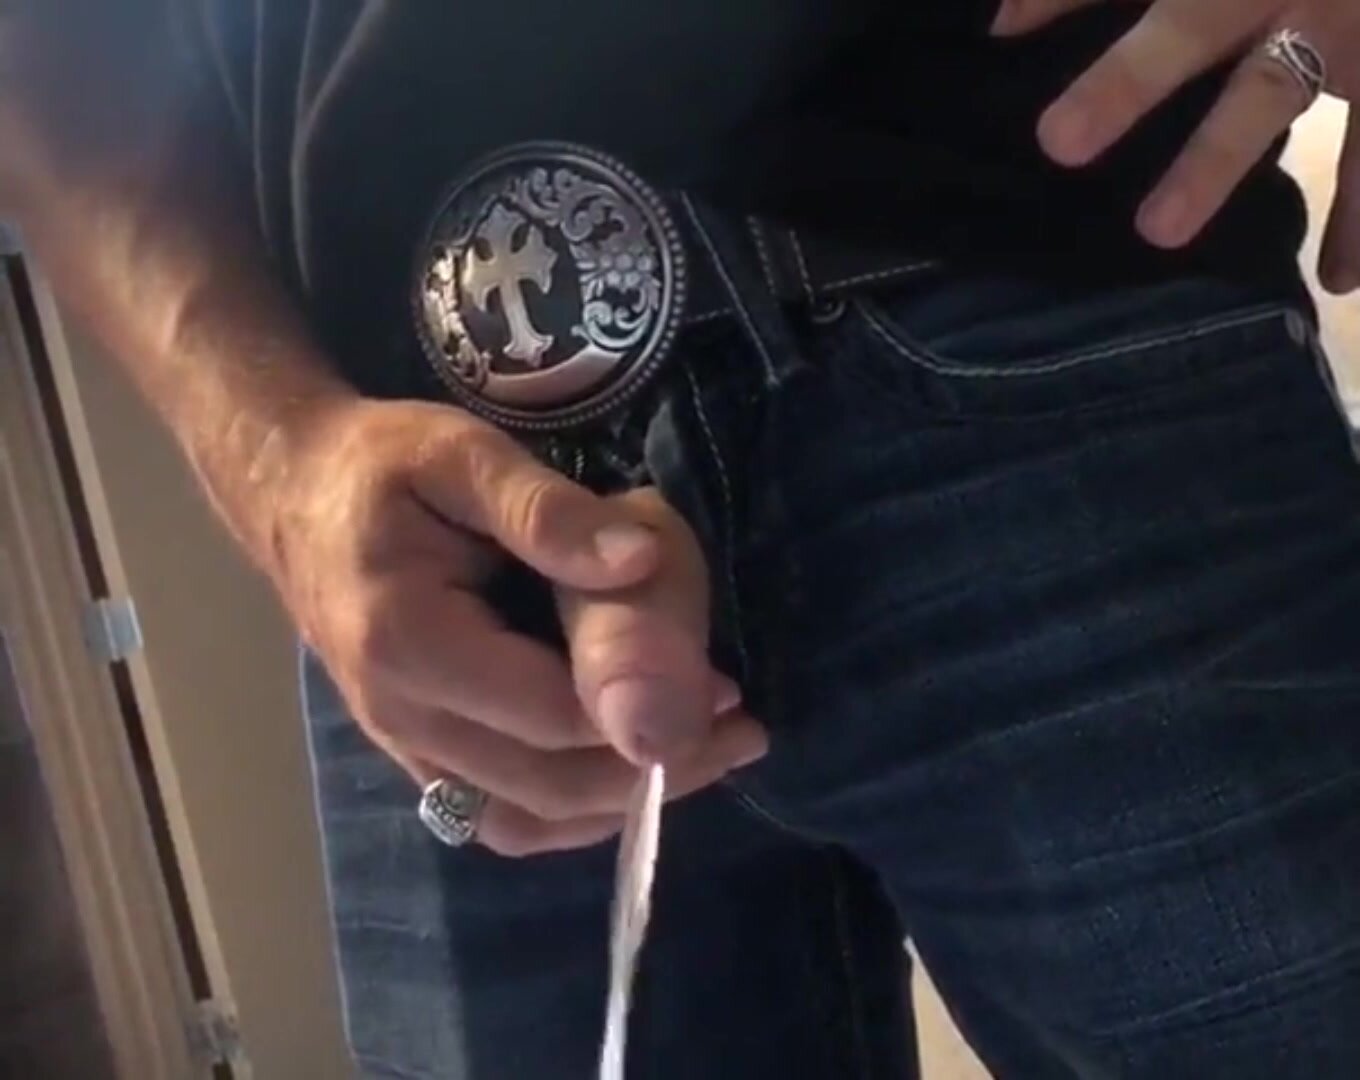 Jeans guy goes pissing